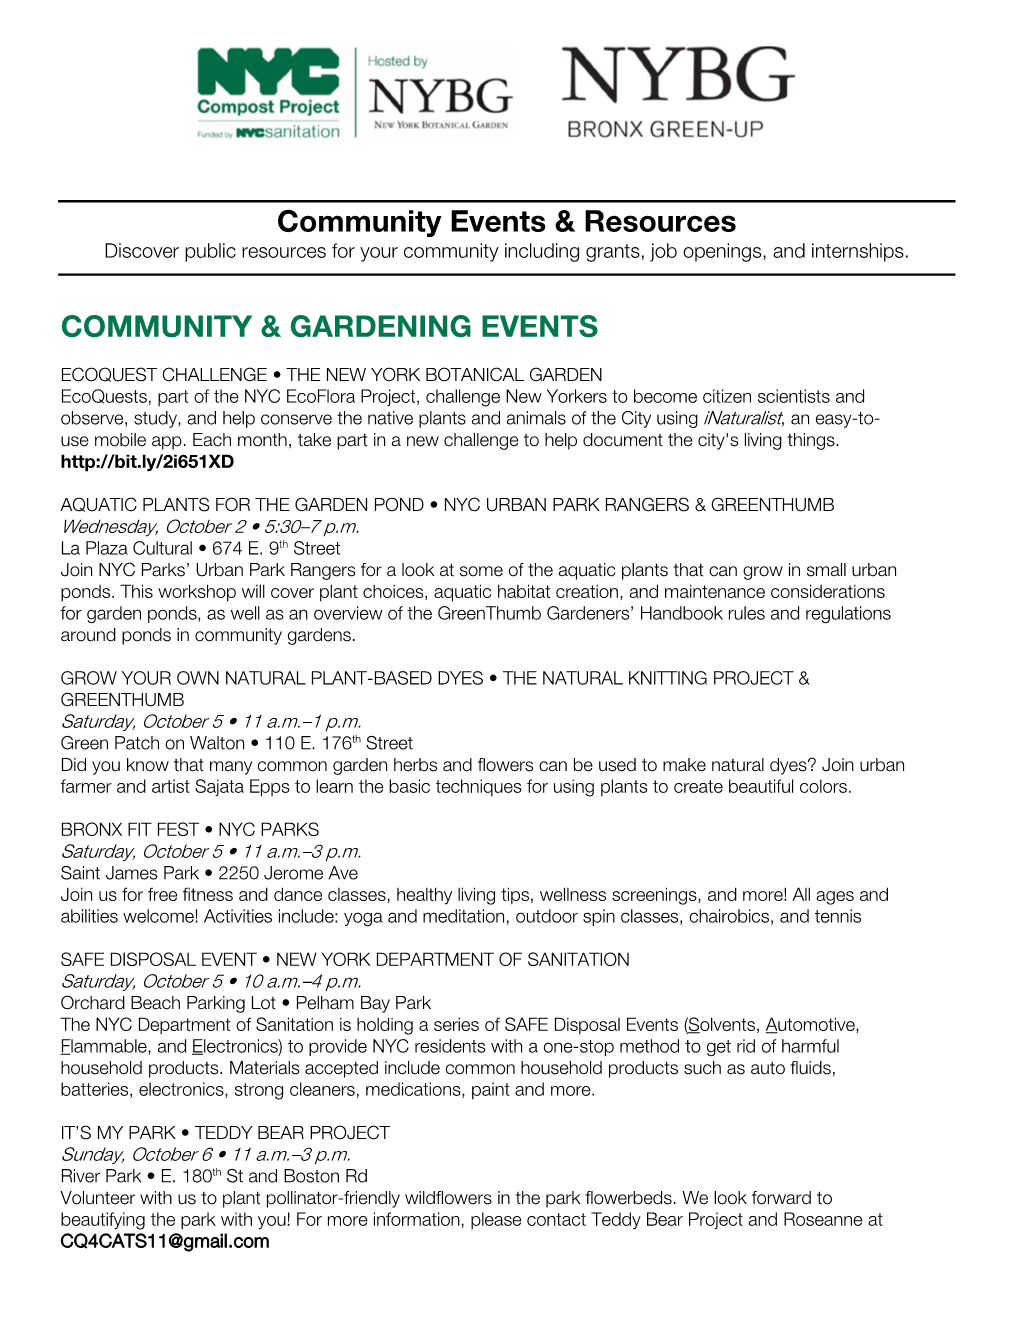 Community Events & Resources COMMUNITY & GARDENING EVENTS